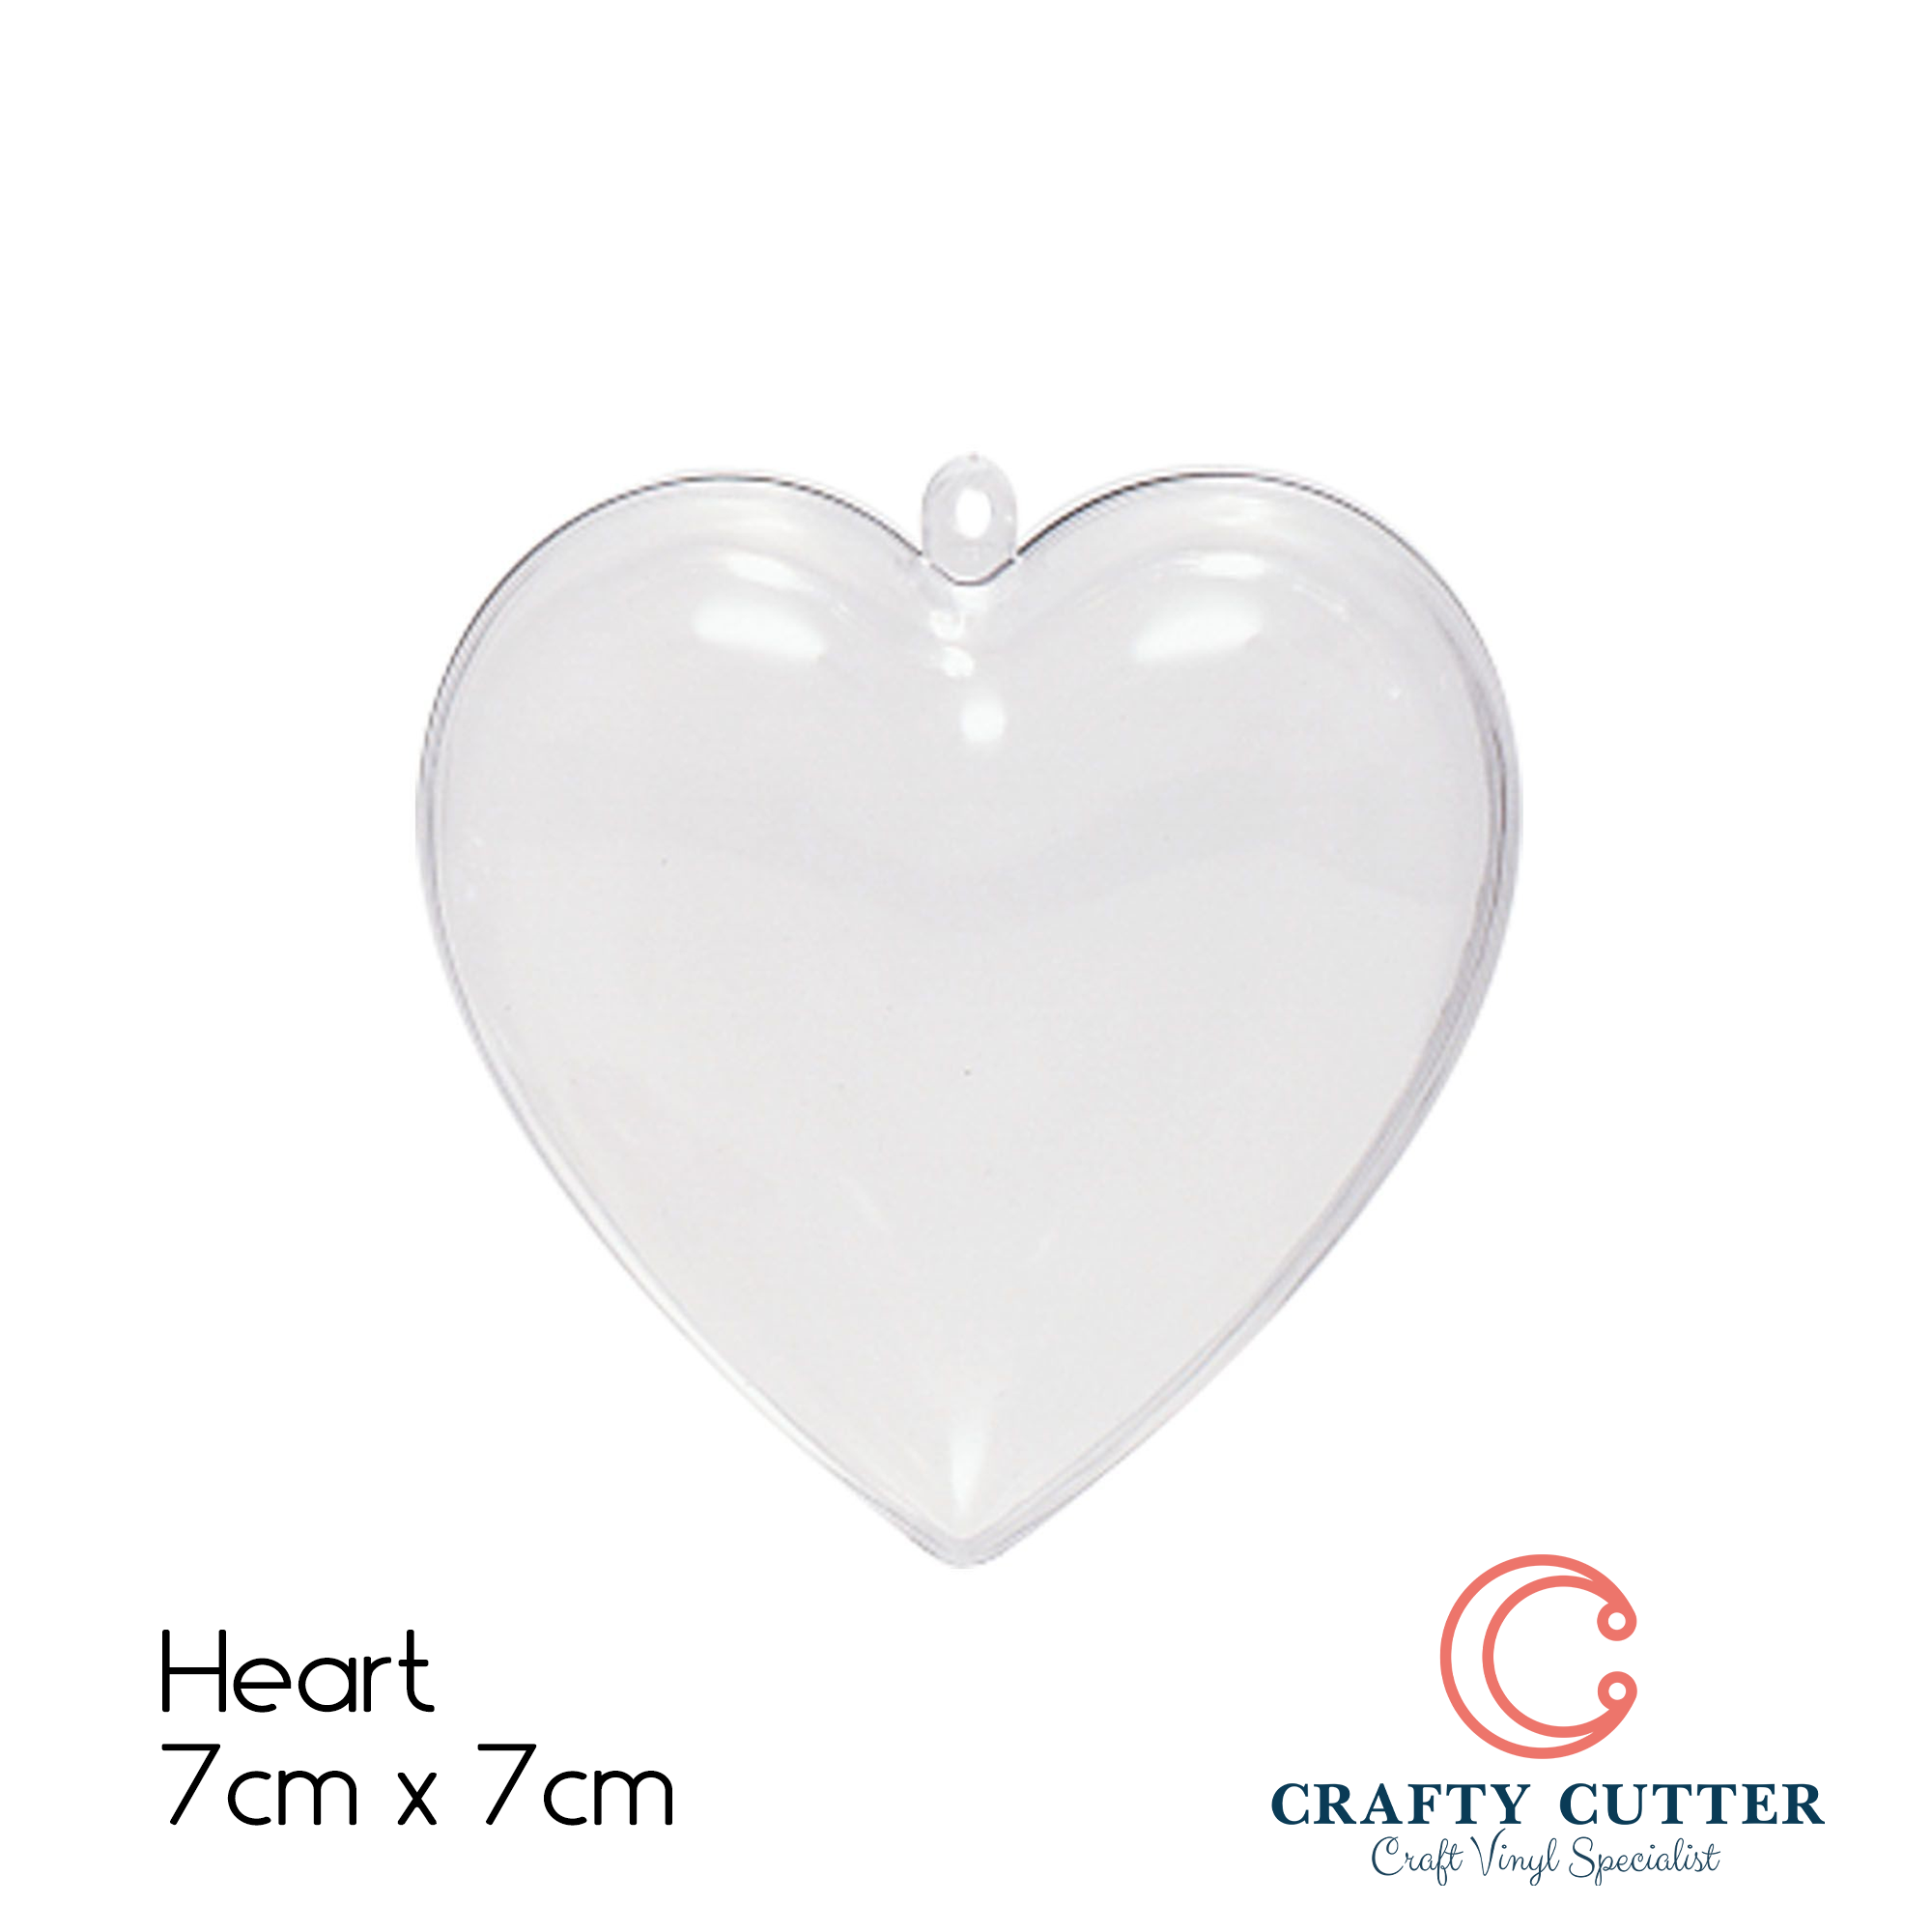 2-Part Shapes Clear Heart